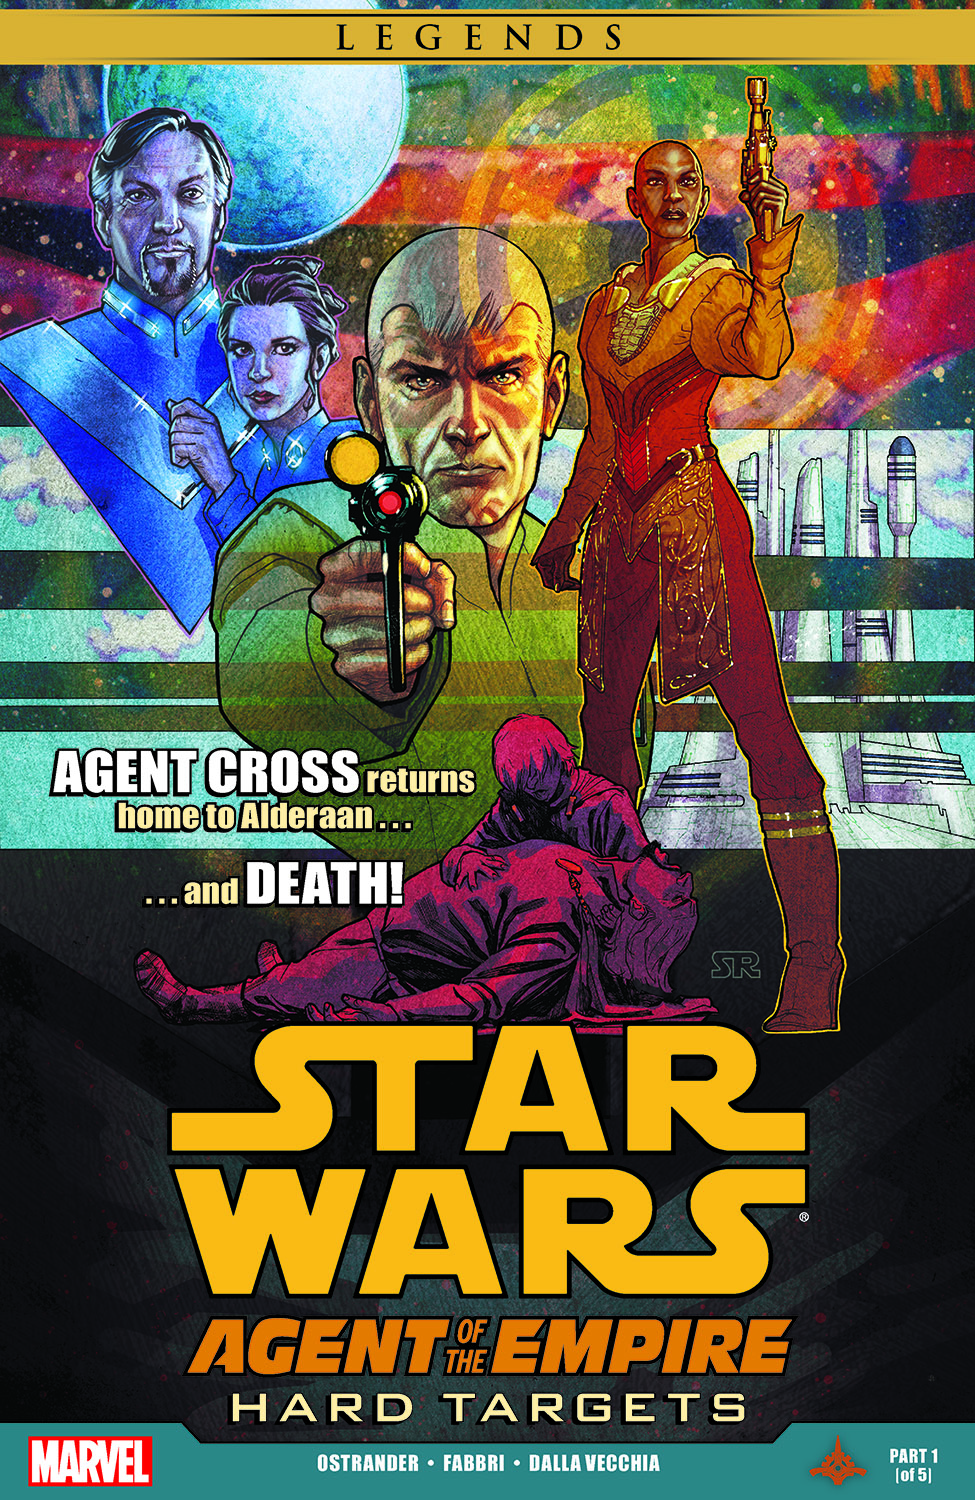 STAR WARS: AGENT OF THE EMPIRE - HARD TARGETS TPB (Trade Paperback)